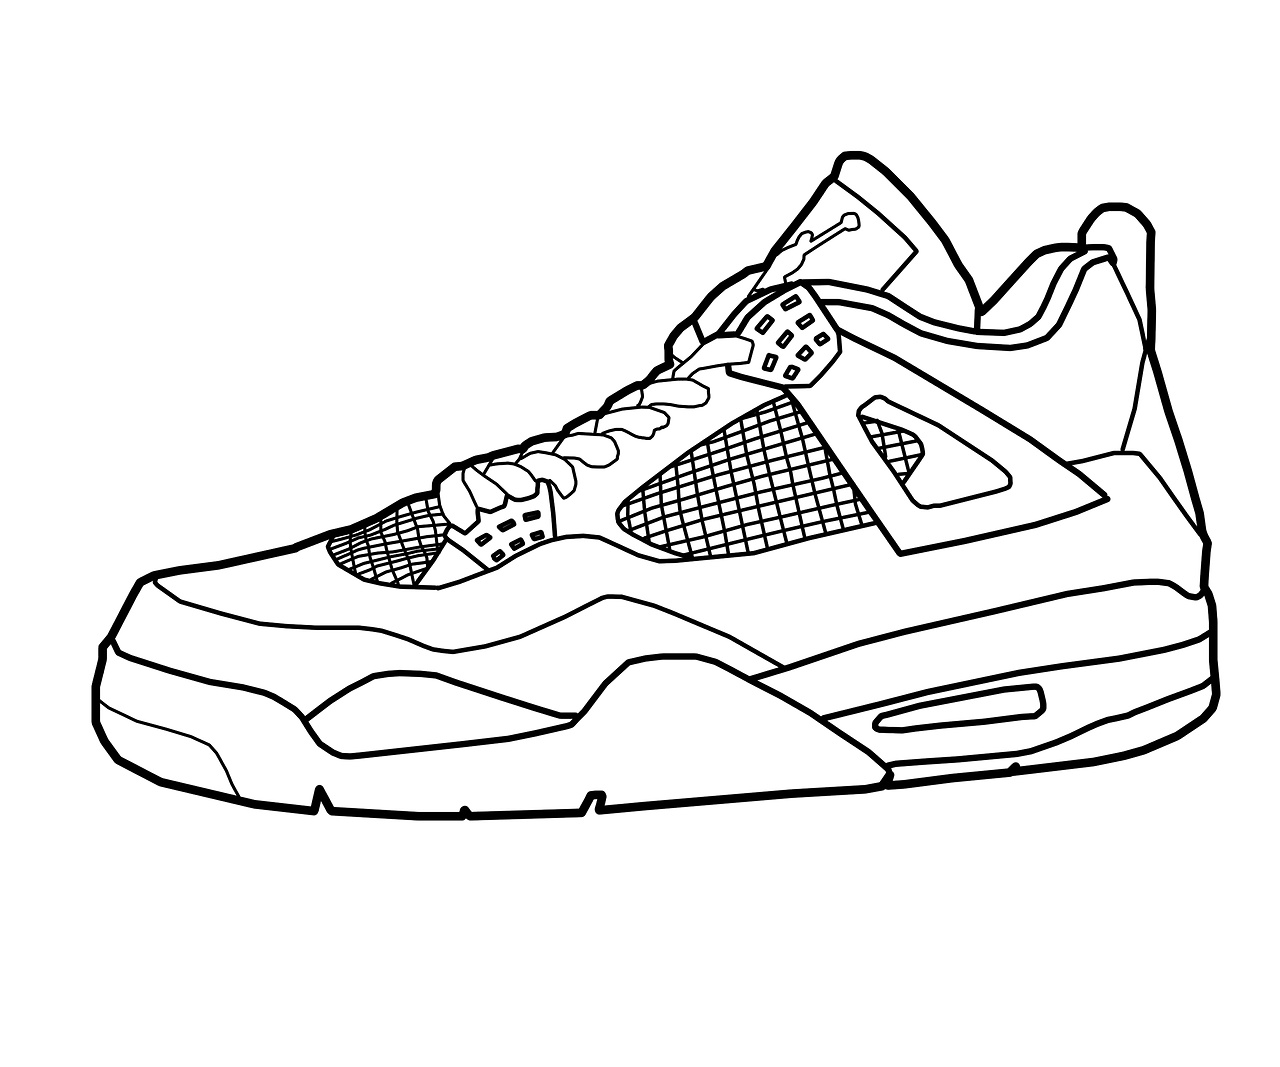 Drawing Jordans Shoes Coloring Pages, Use These Free Images For